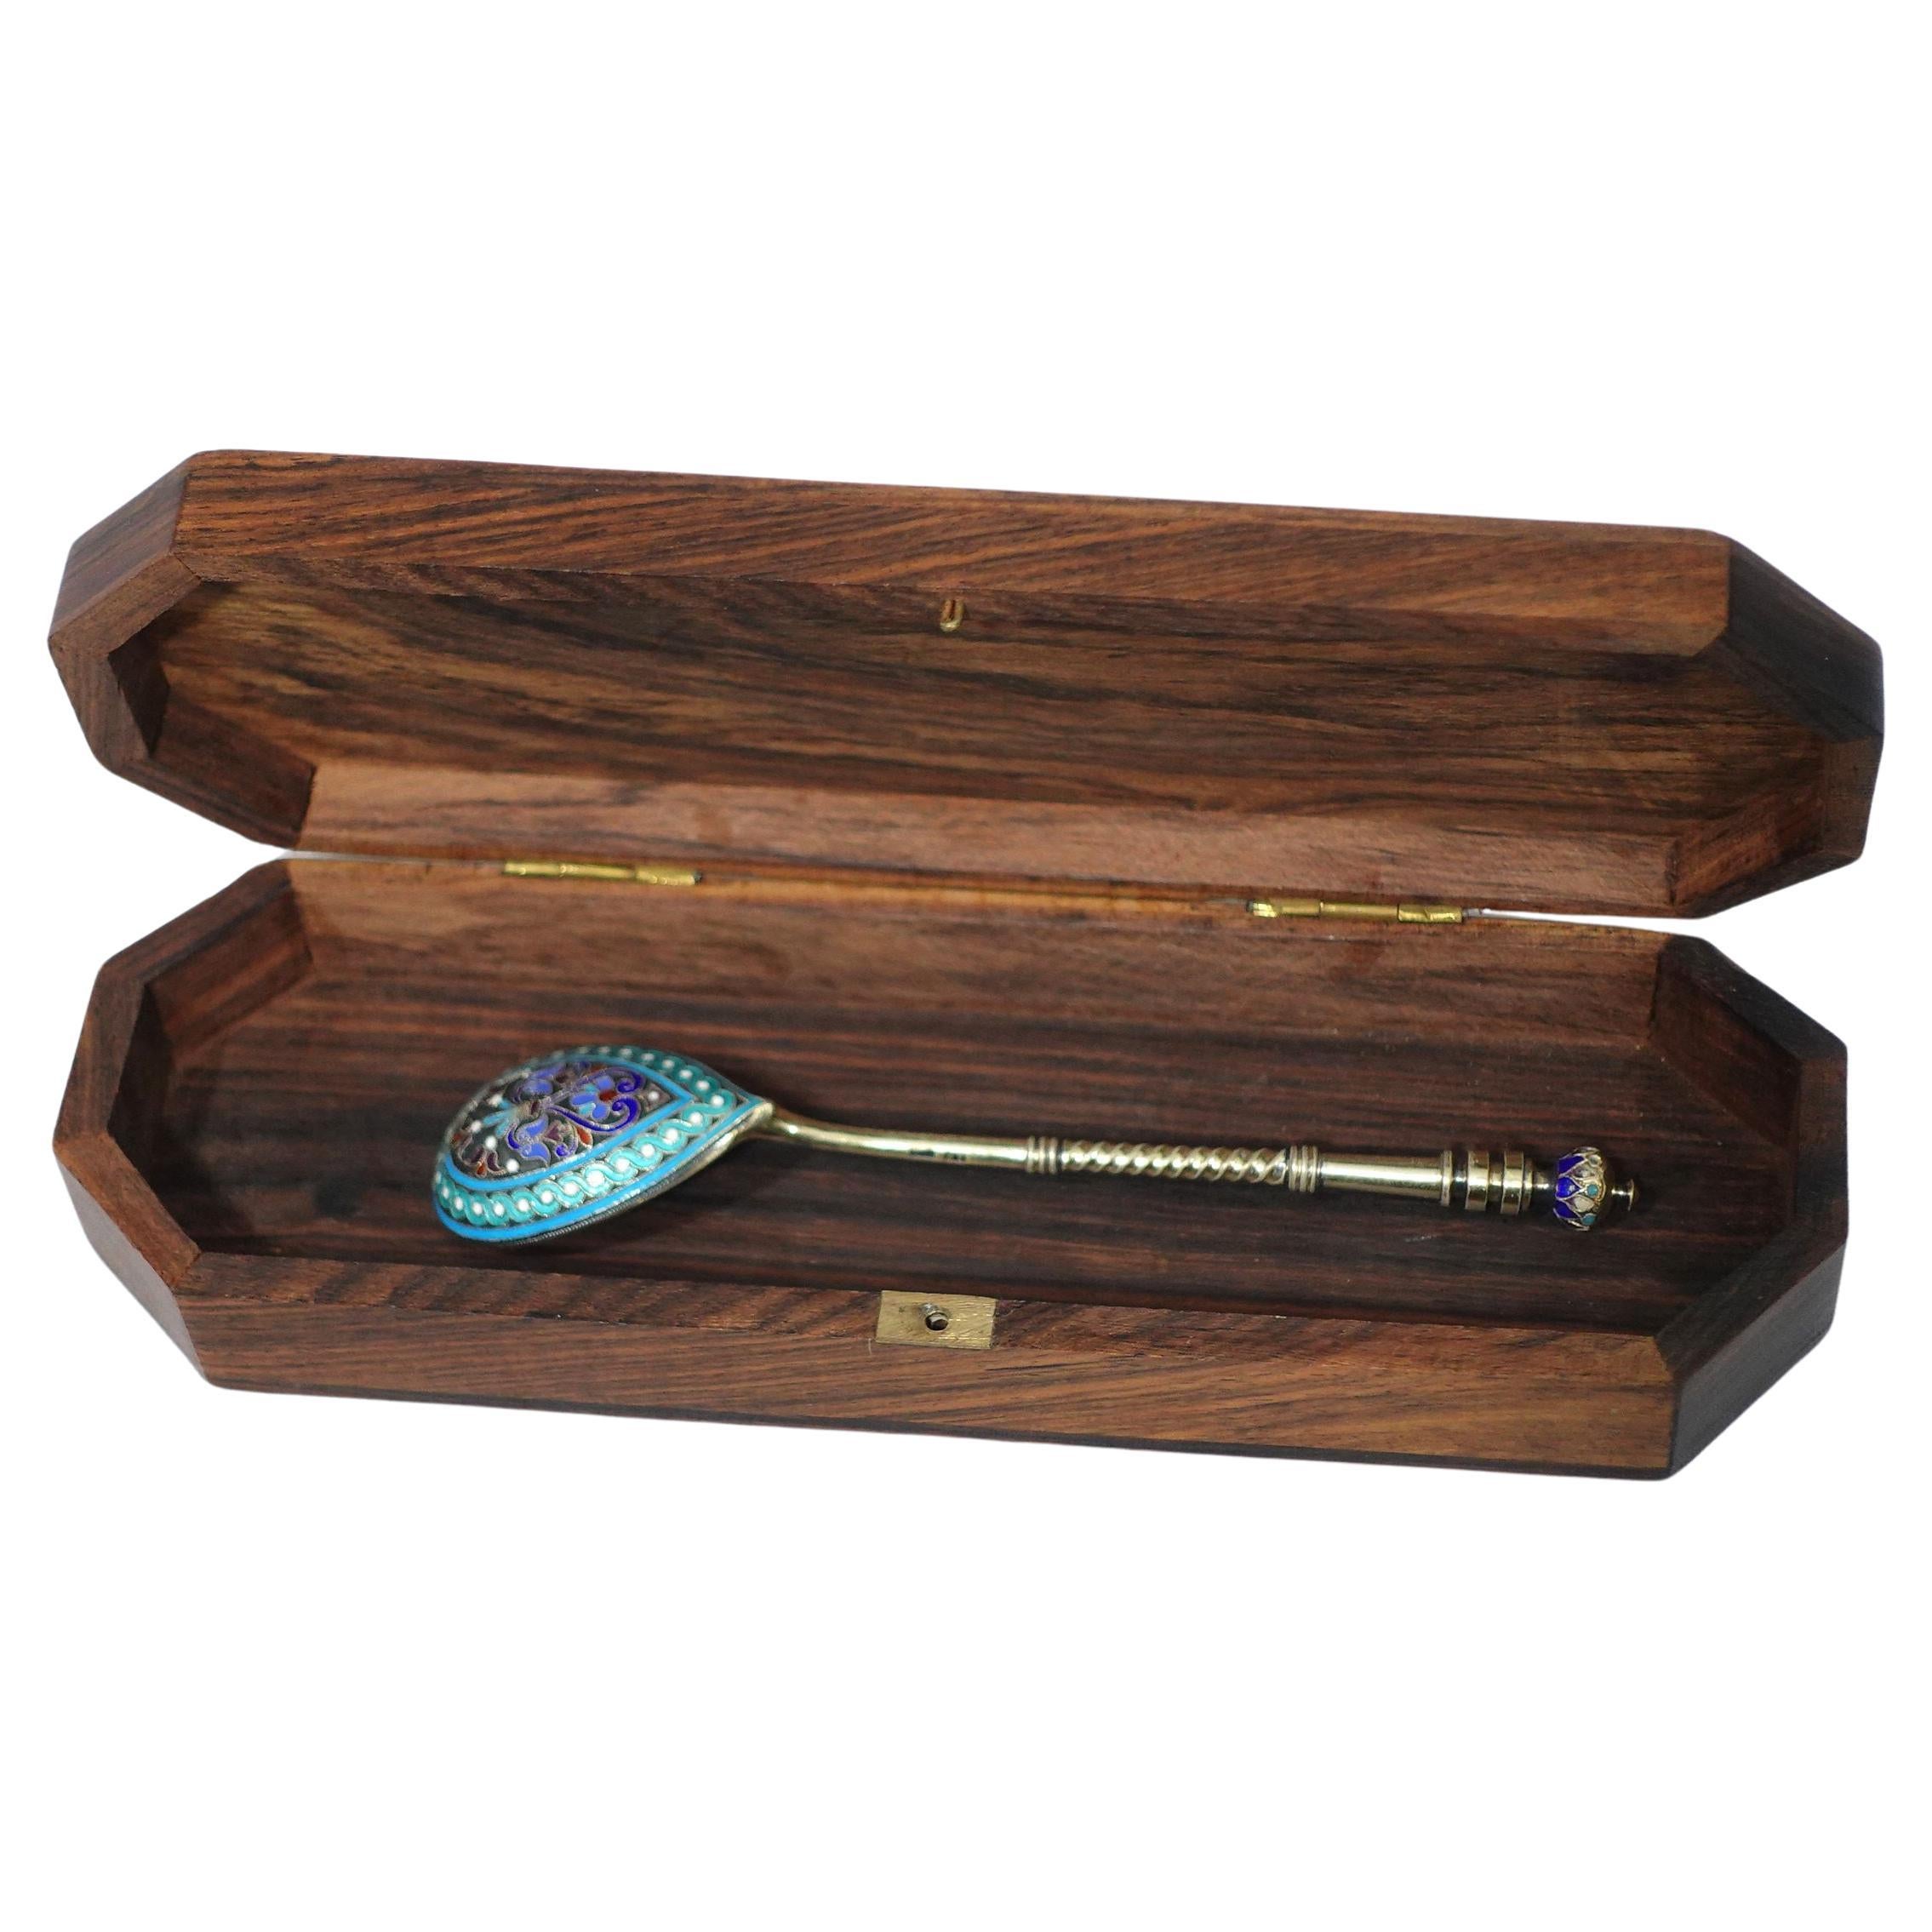 Russian .916 Gilt Silver and Cloisonné Enamel Spoon in Mahogany Box